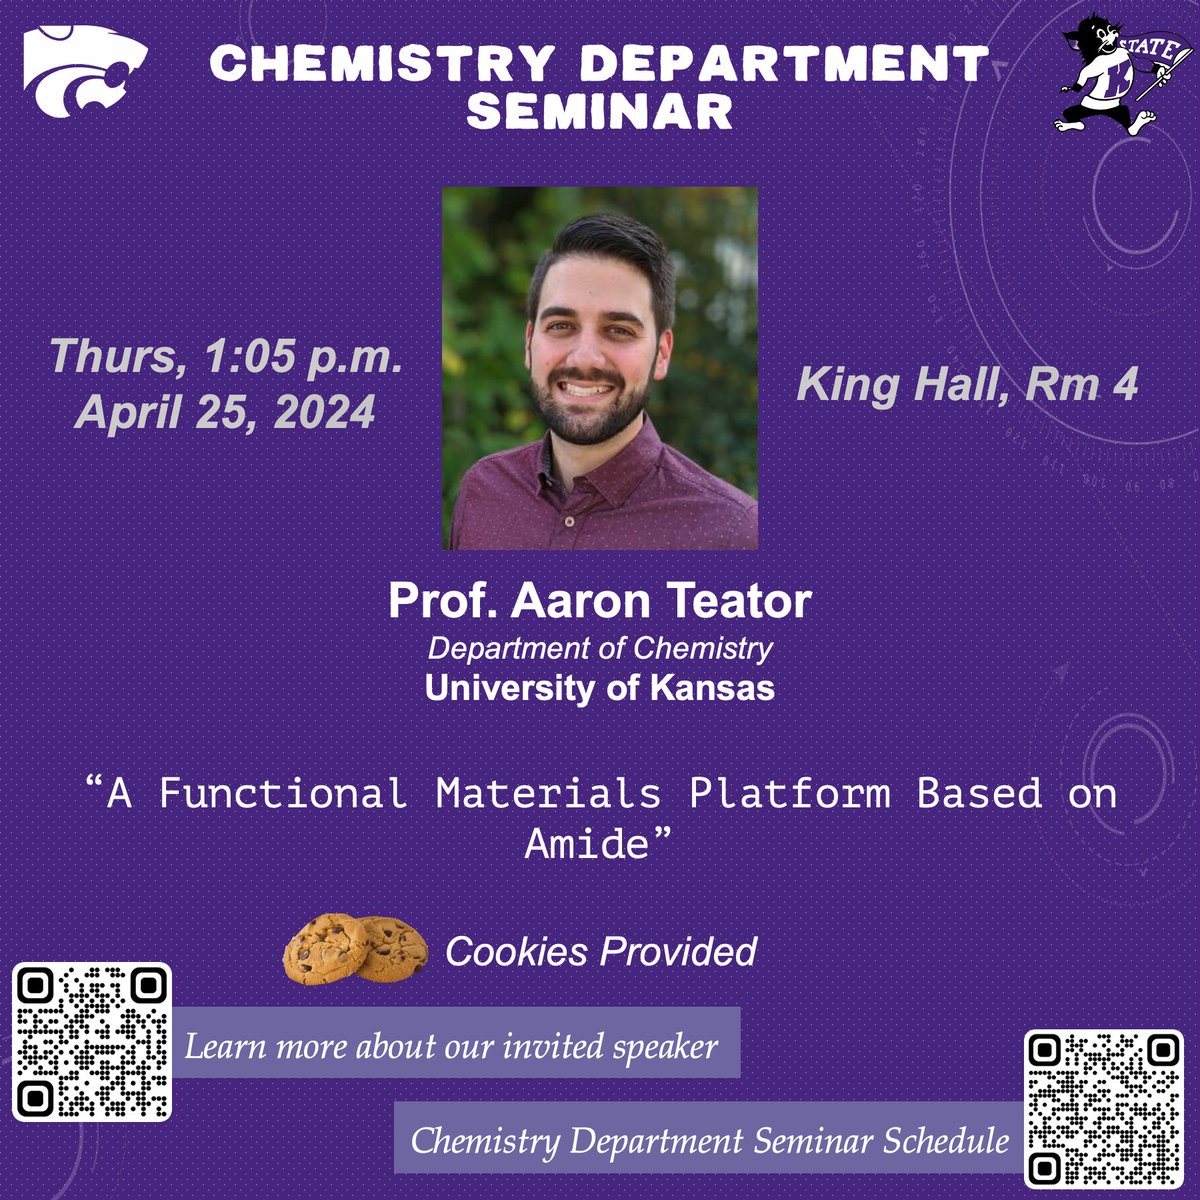 Our departmental seminar this Thursday is Prof @AaronTeator from our neighbors @KUChemistry. For abstract & bio: k-state.edu/today/announce…